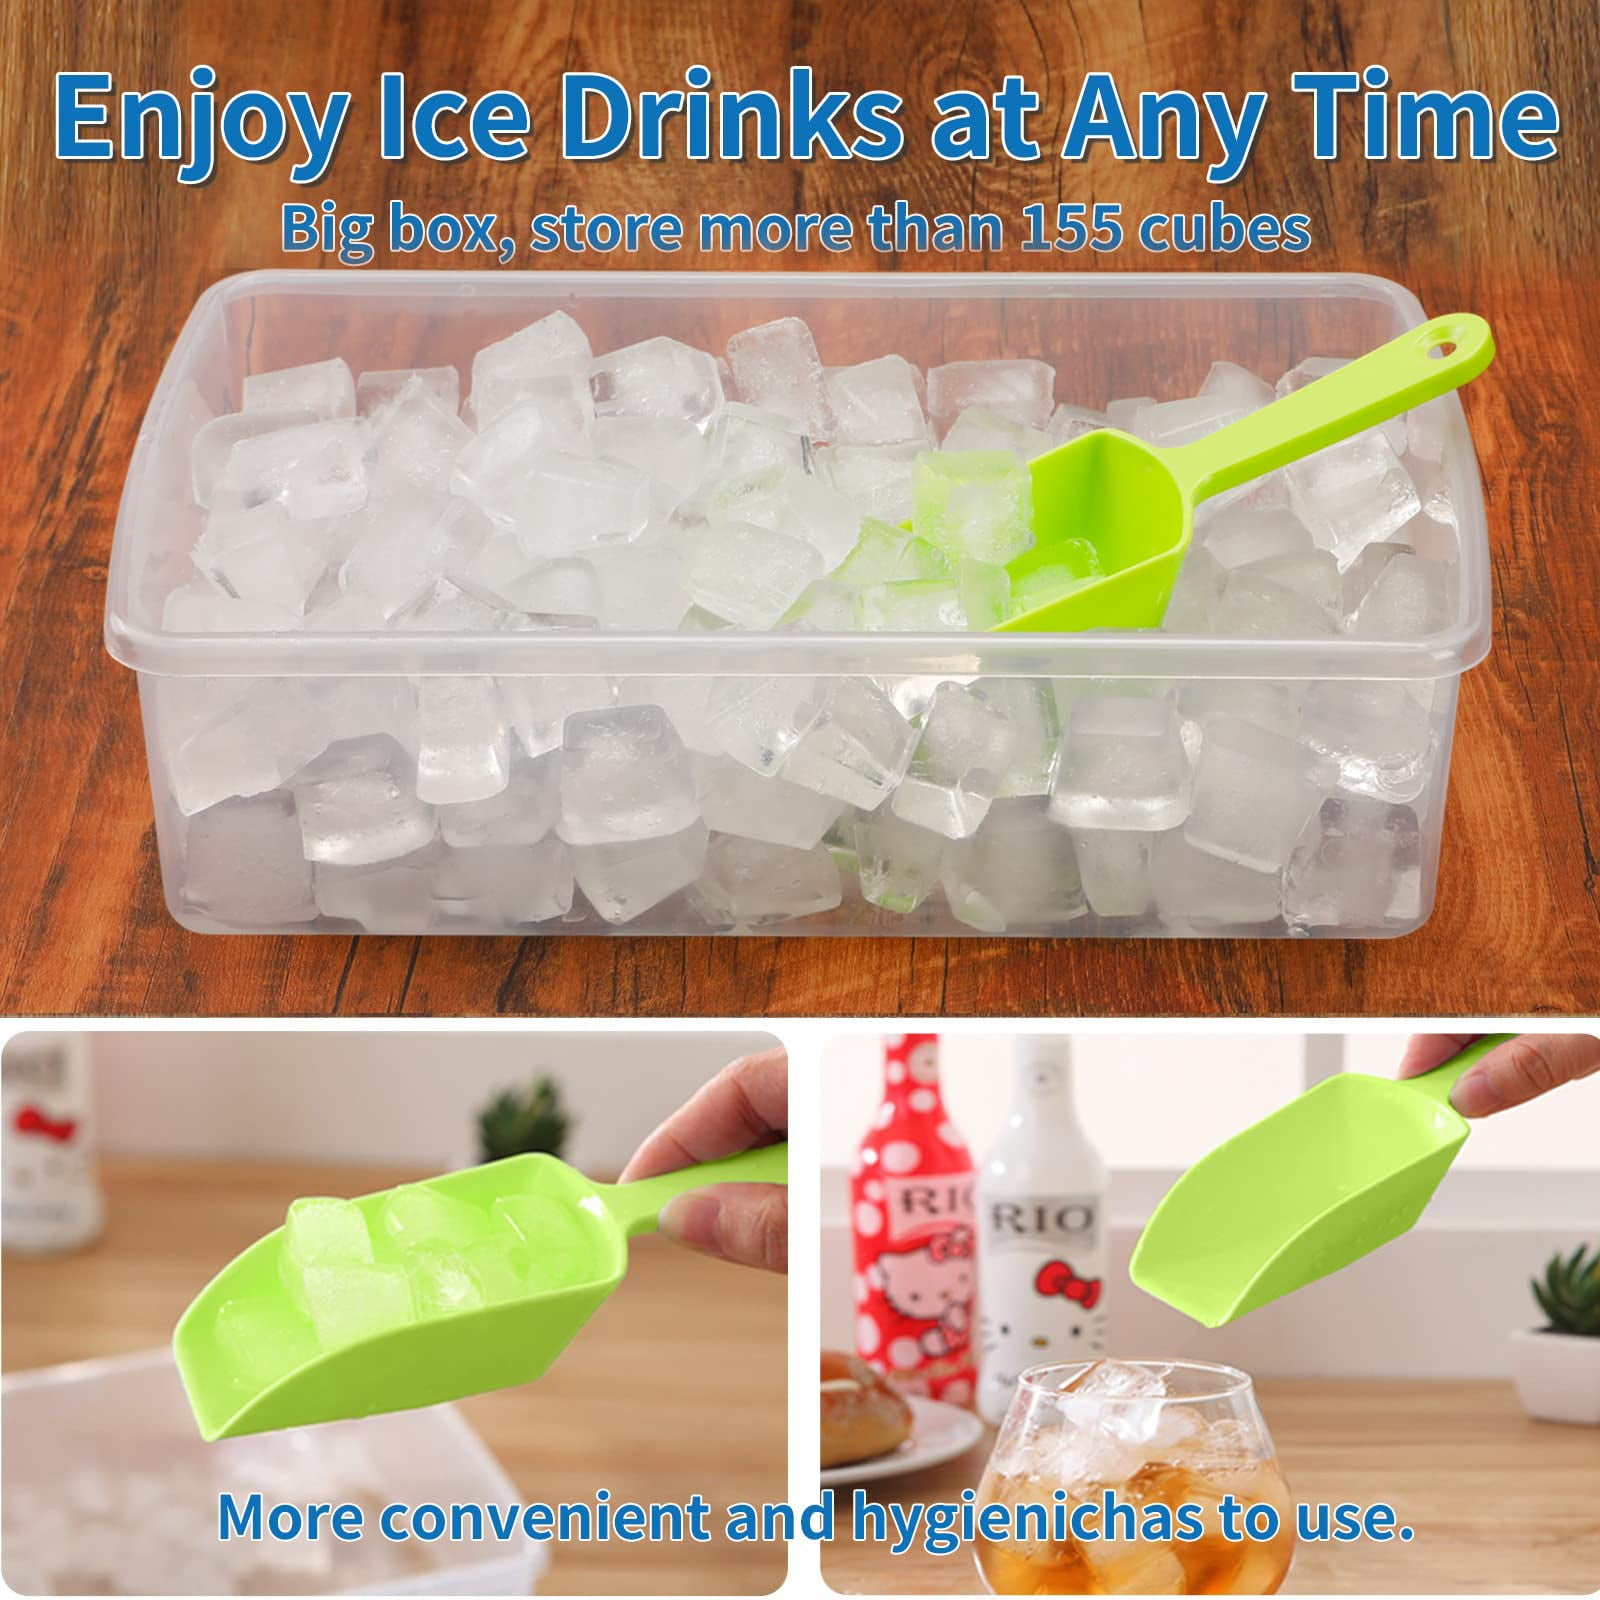 GAIORD Ice Cube Trays,Ice Tray Food Grade Flexible Silicone Ice Cube Tray Molds with Lids, Easy Release Ice Trays Make 63 Ice Cube, Stackable